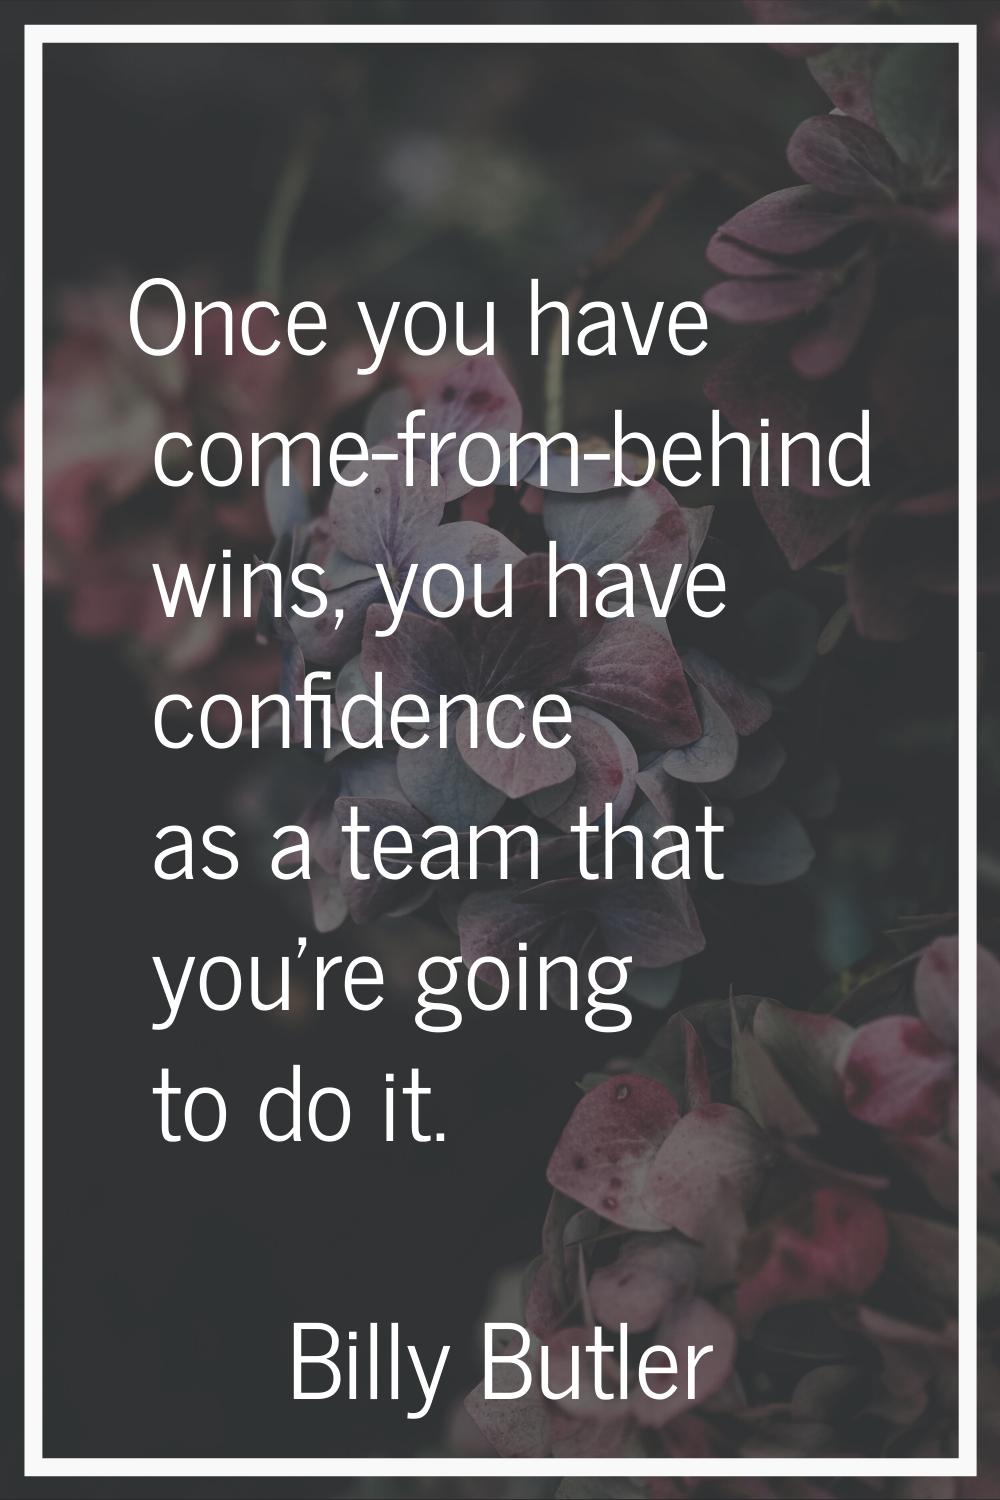 Once you have come-from-behind wins, you have confidence as a team that you're going to do it.